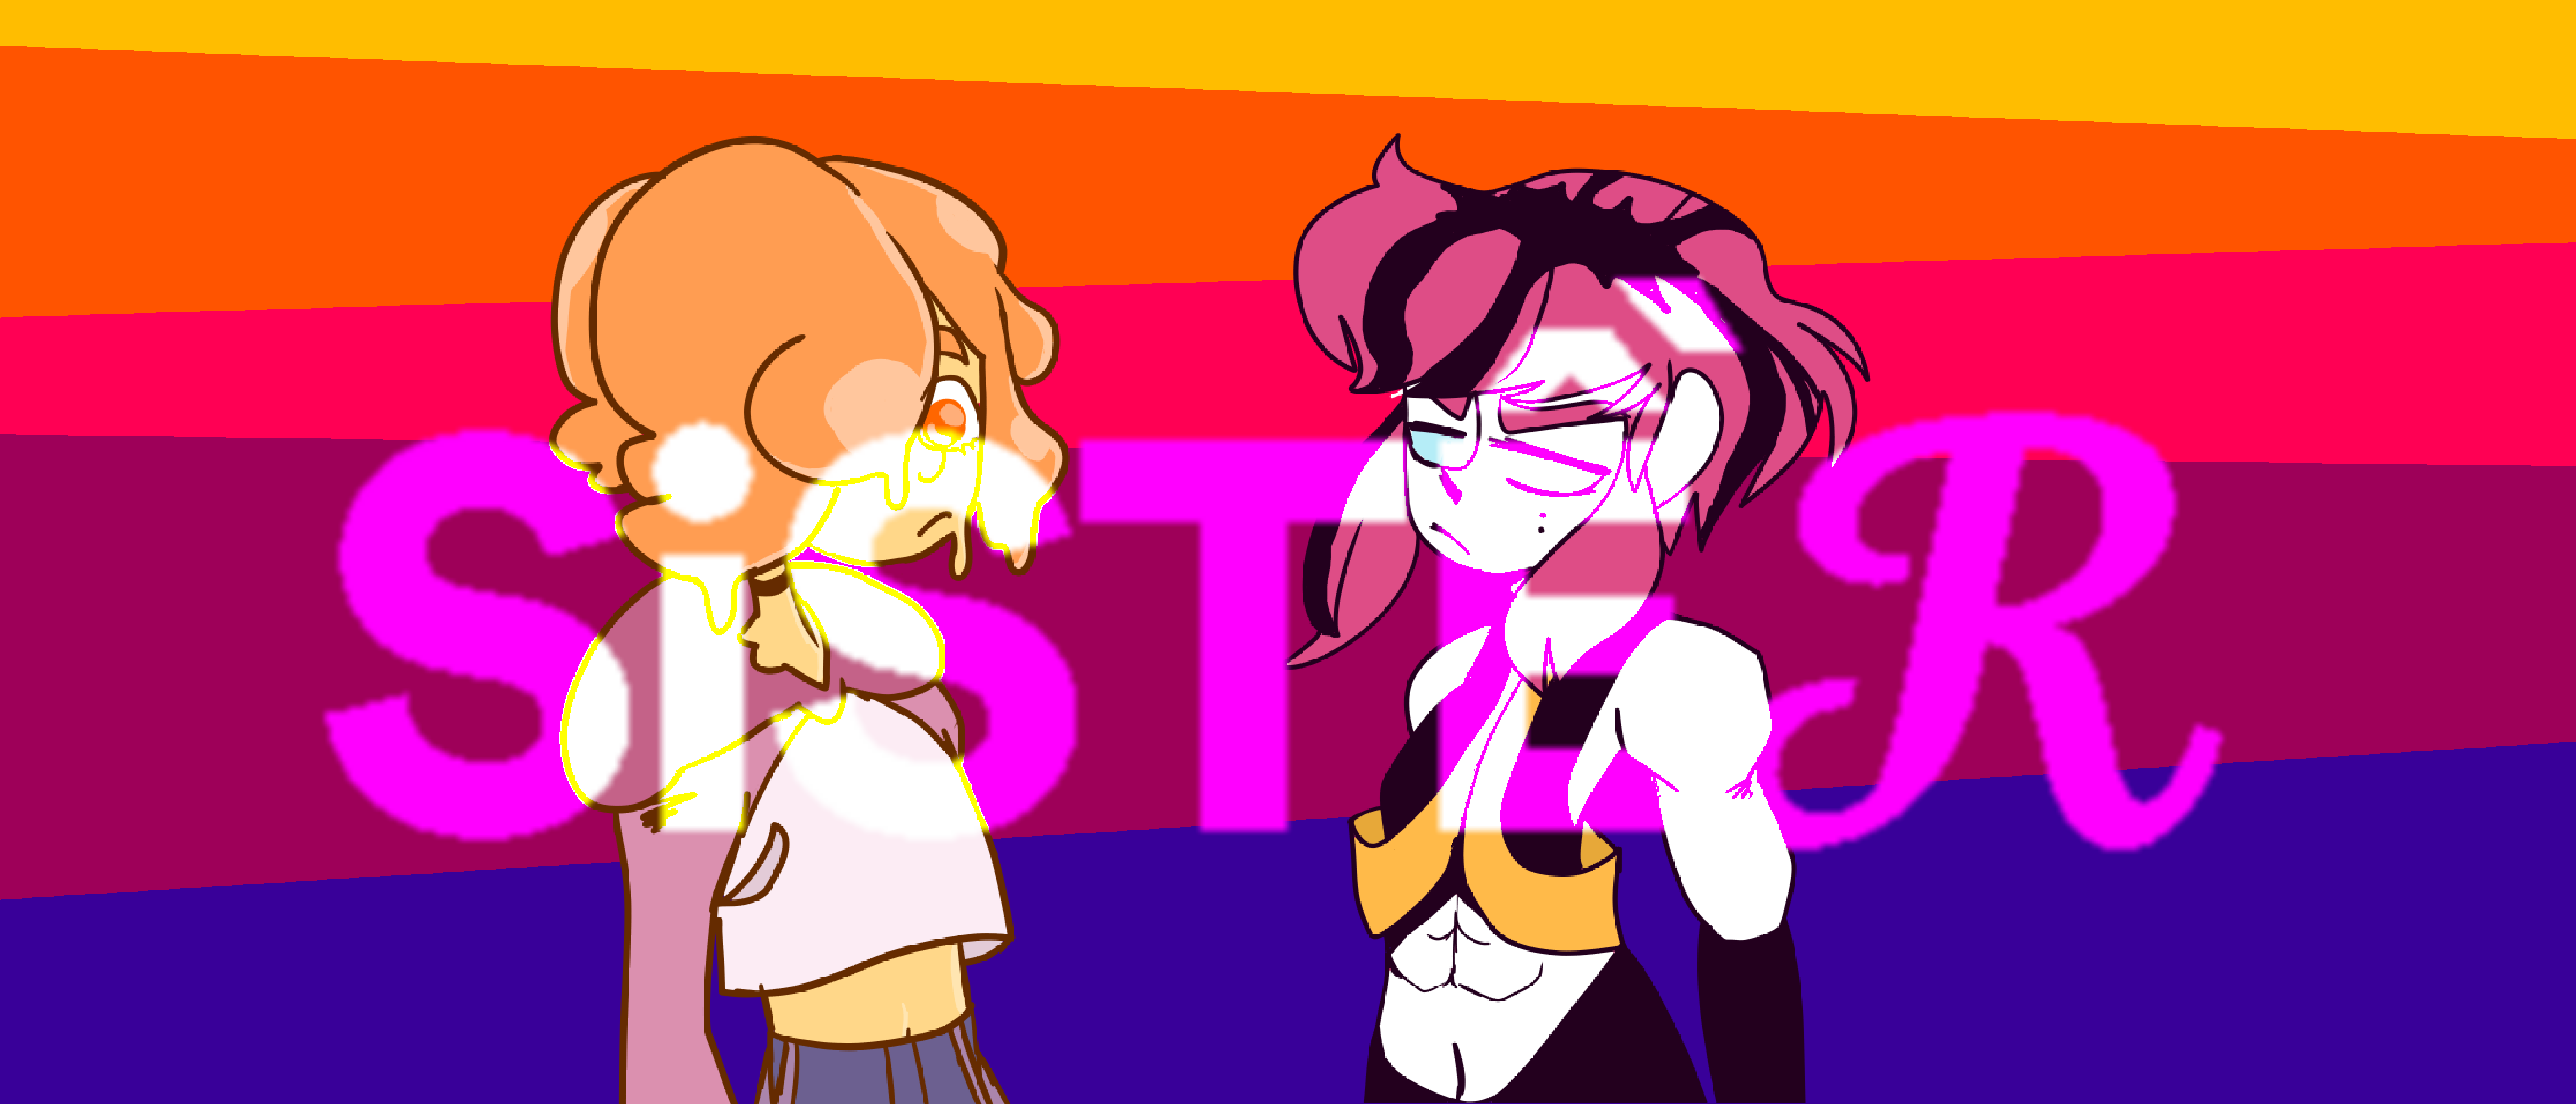 Banner image for SiSTỀℛ, including two characters